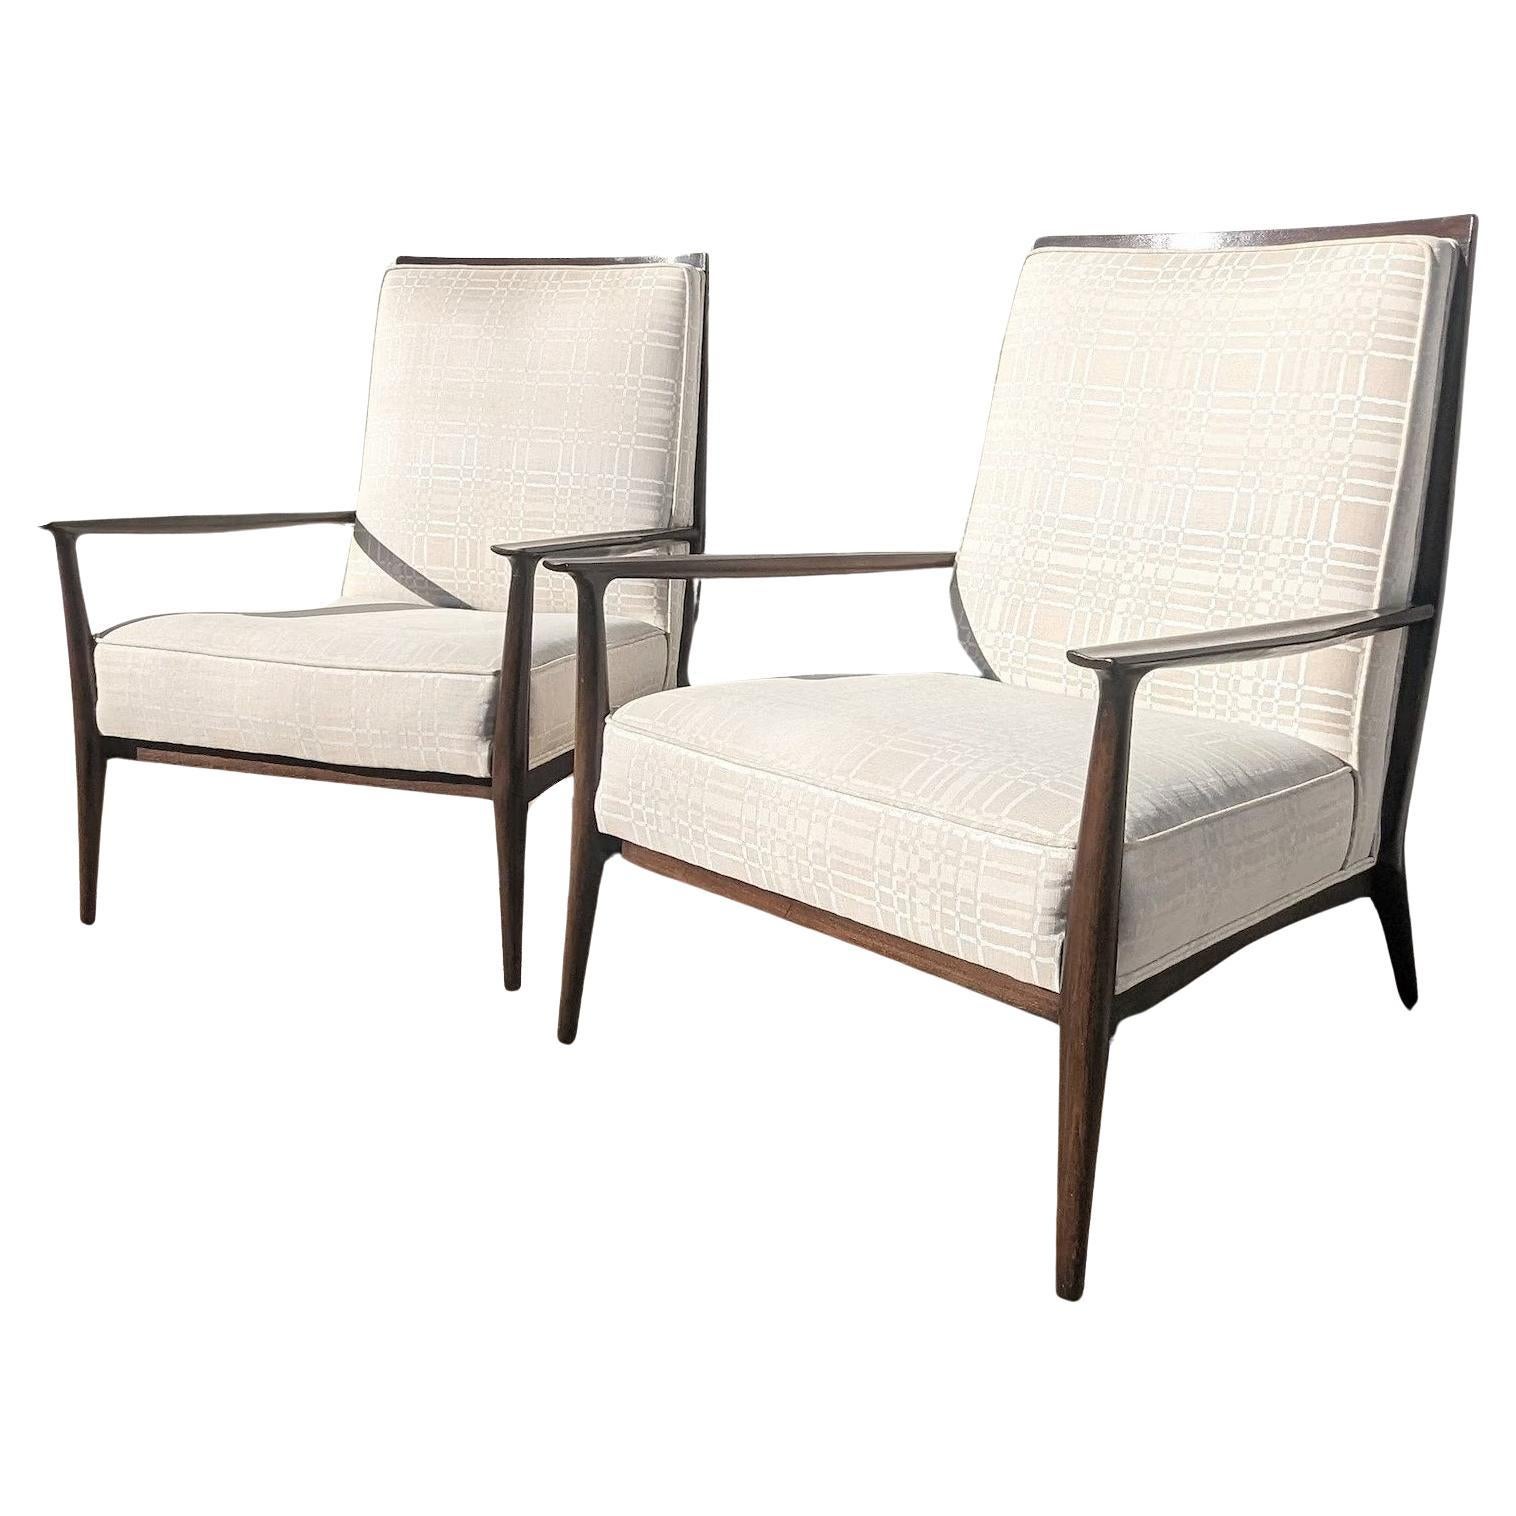 Pair of Mid Century Modern Paul McCobb for Directional Lounge Chairs For Sale